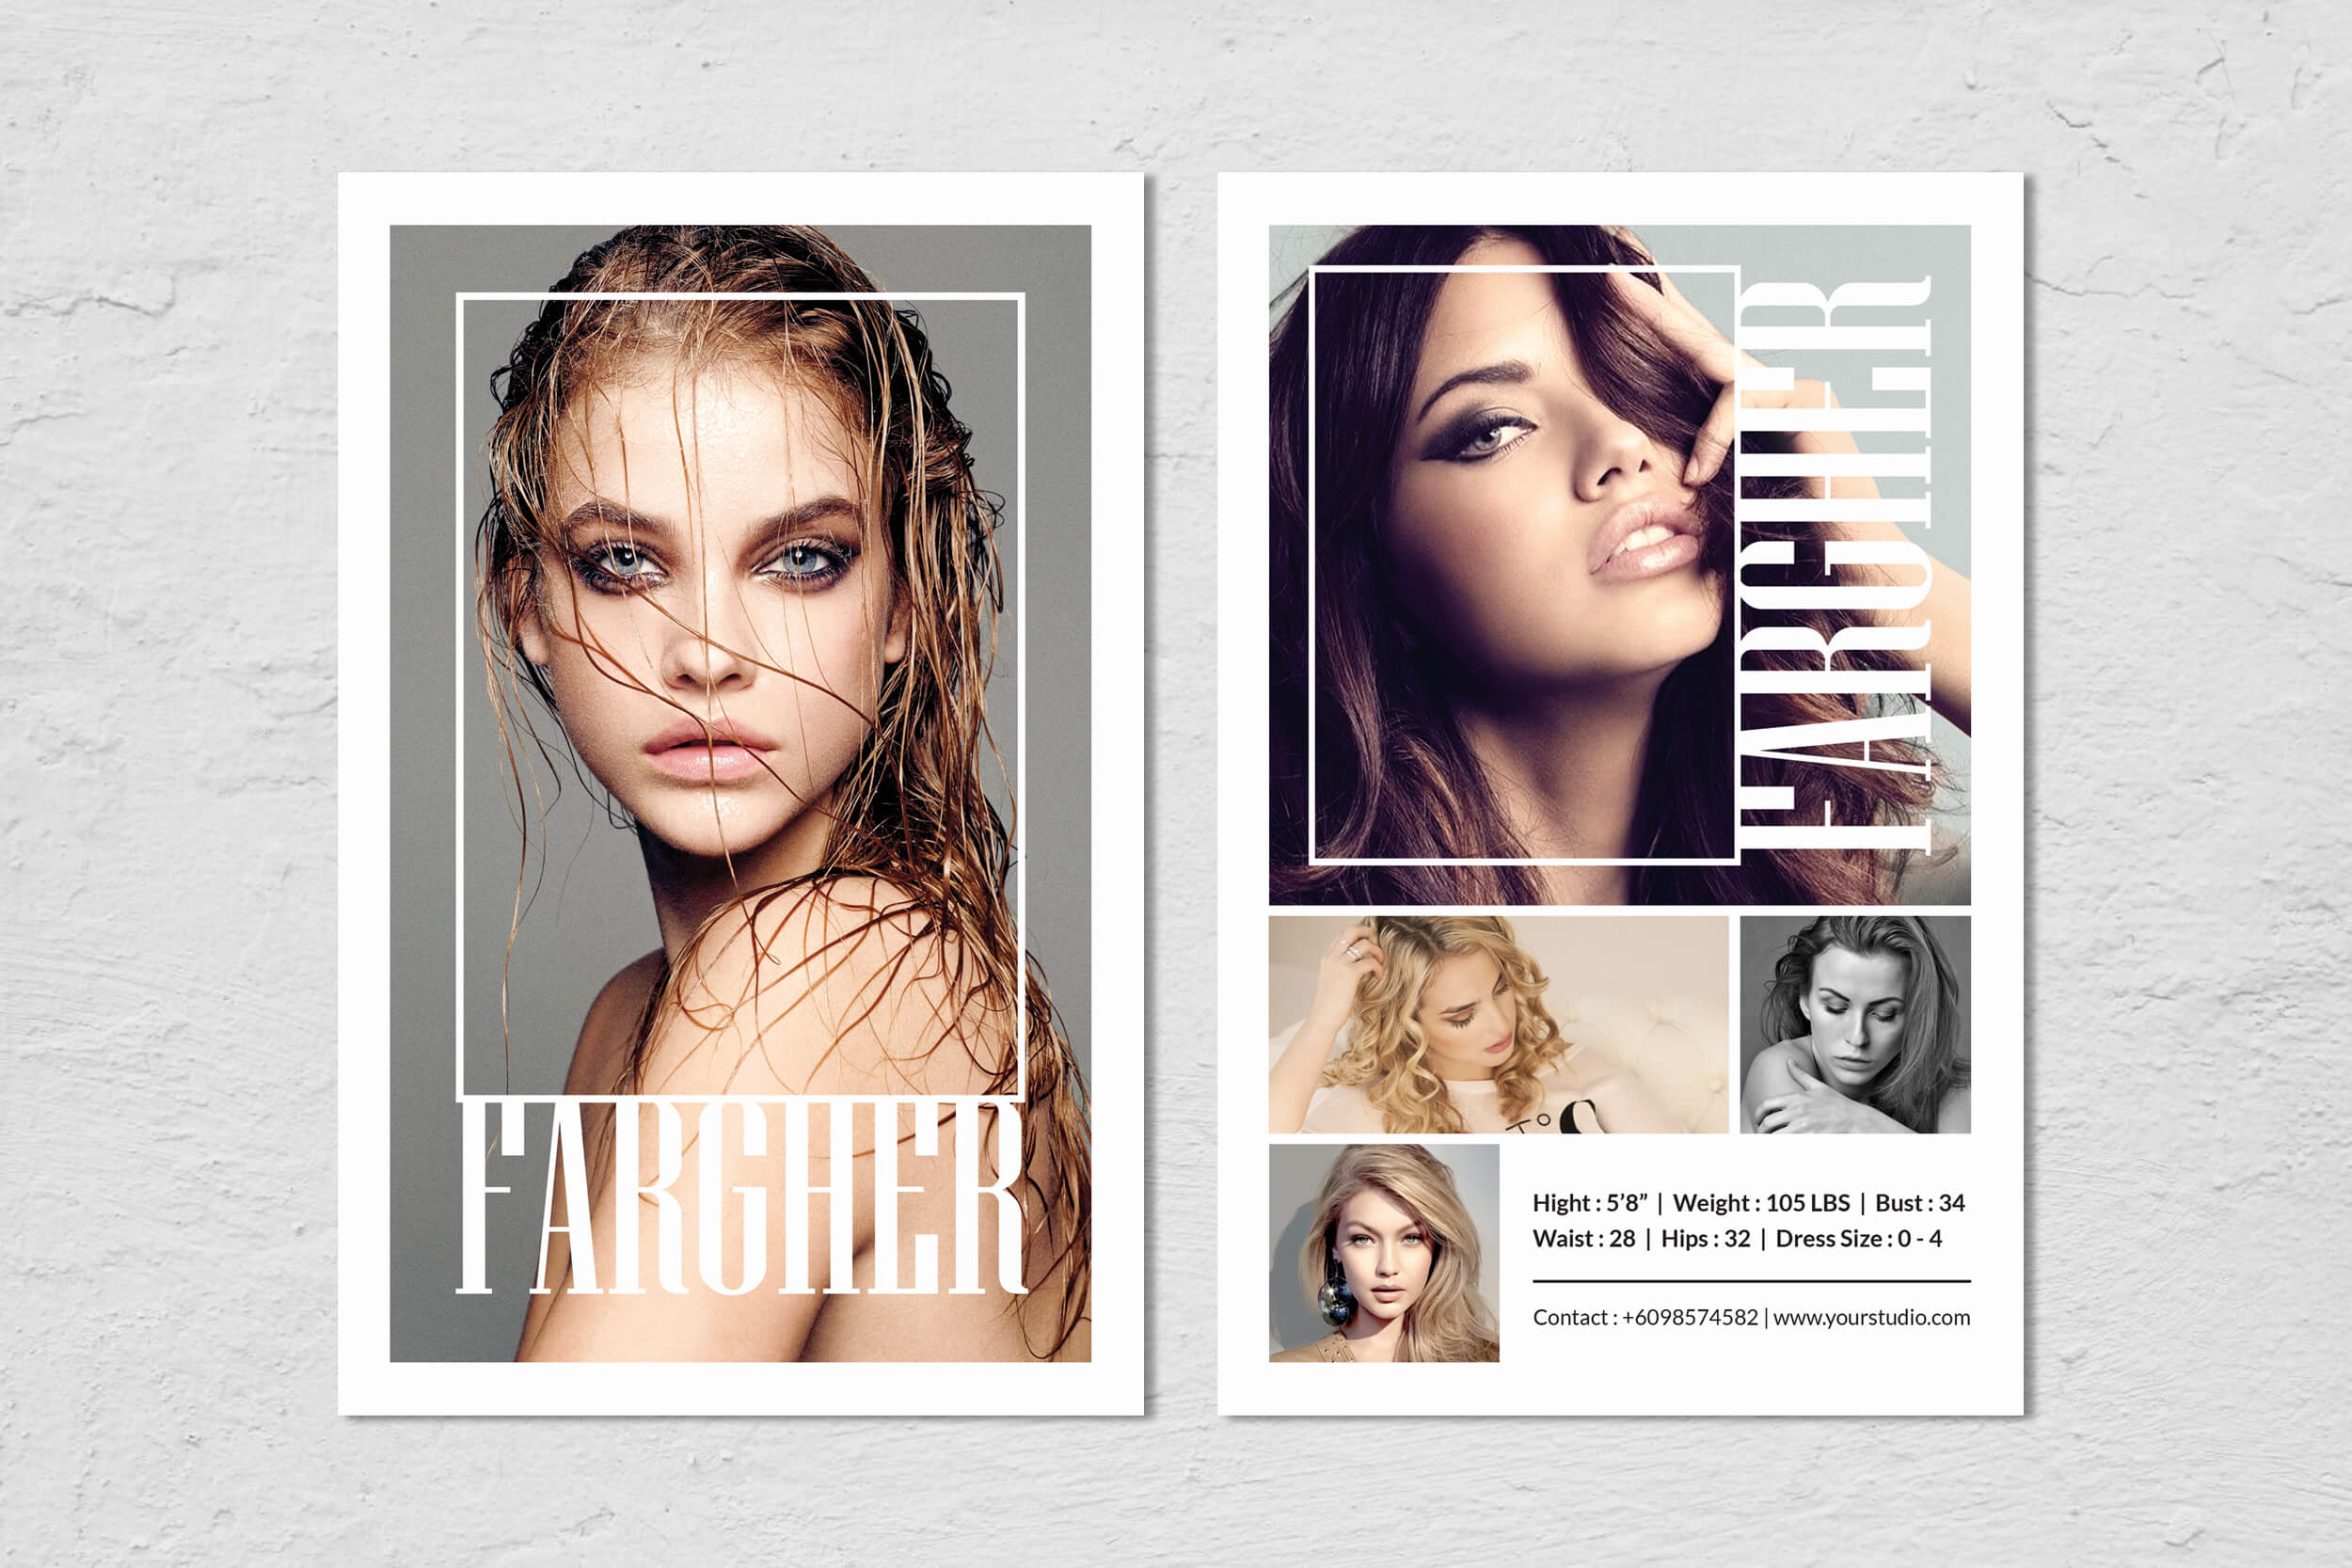 001 Template Ideas Model Comp Card Outstanding Psd Free Regarding Model Comp Card Template Free